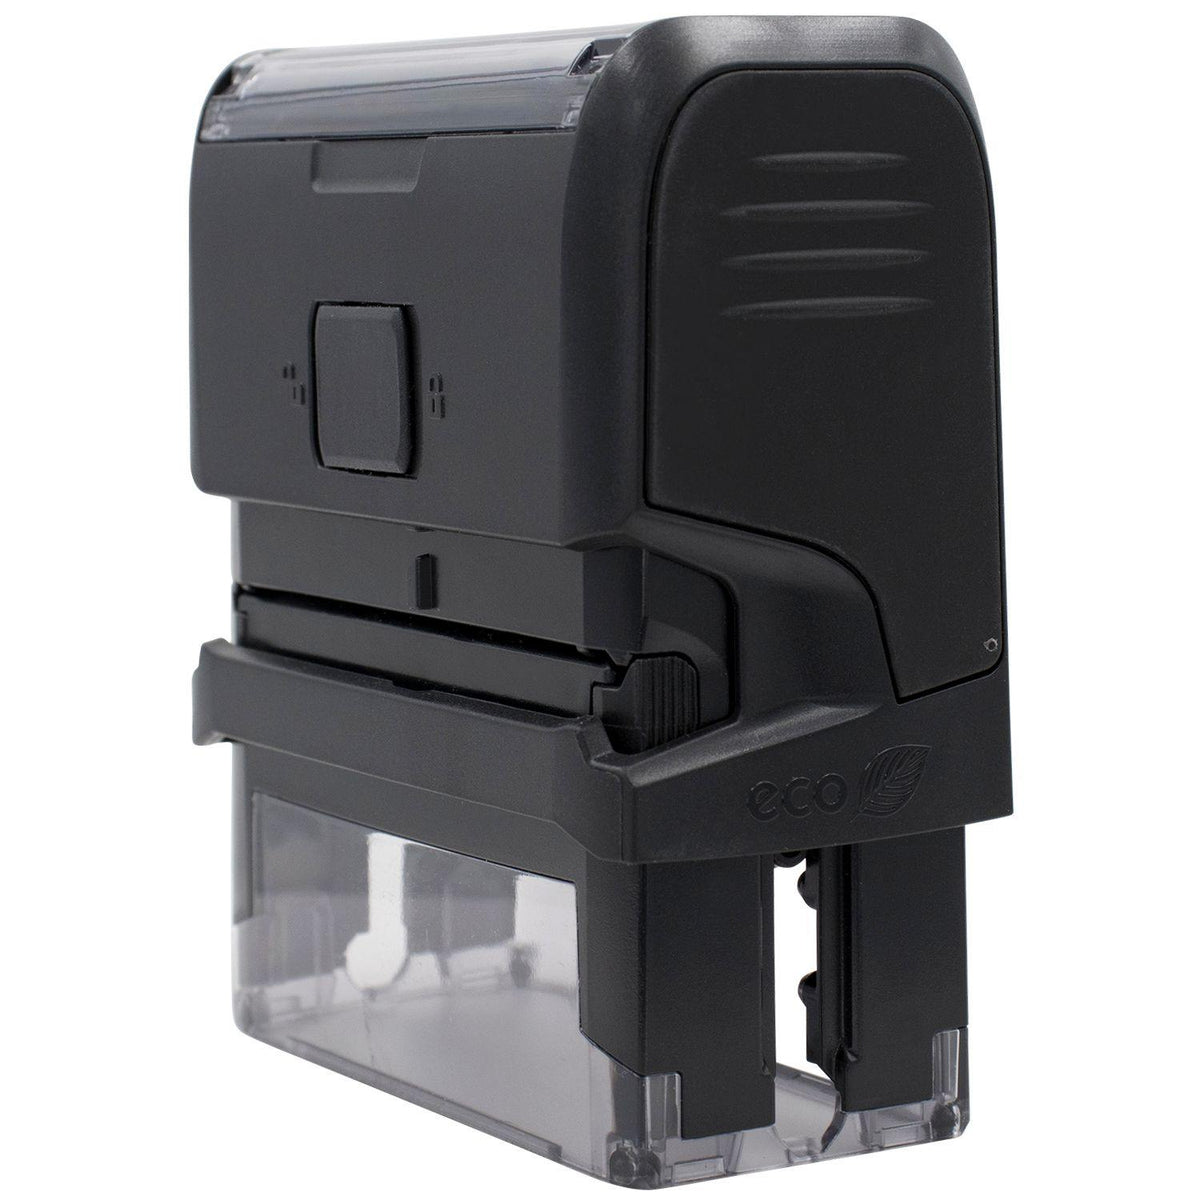 Self-Inking Cancelado Stamp - Engineer Seal Stamps - Brand_Trodat, Impression Size_Small, Stamp Type_Self-Inking Stamp, Type of Use_General, Type of Use_Office